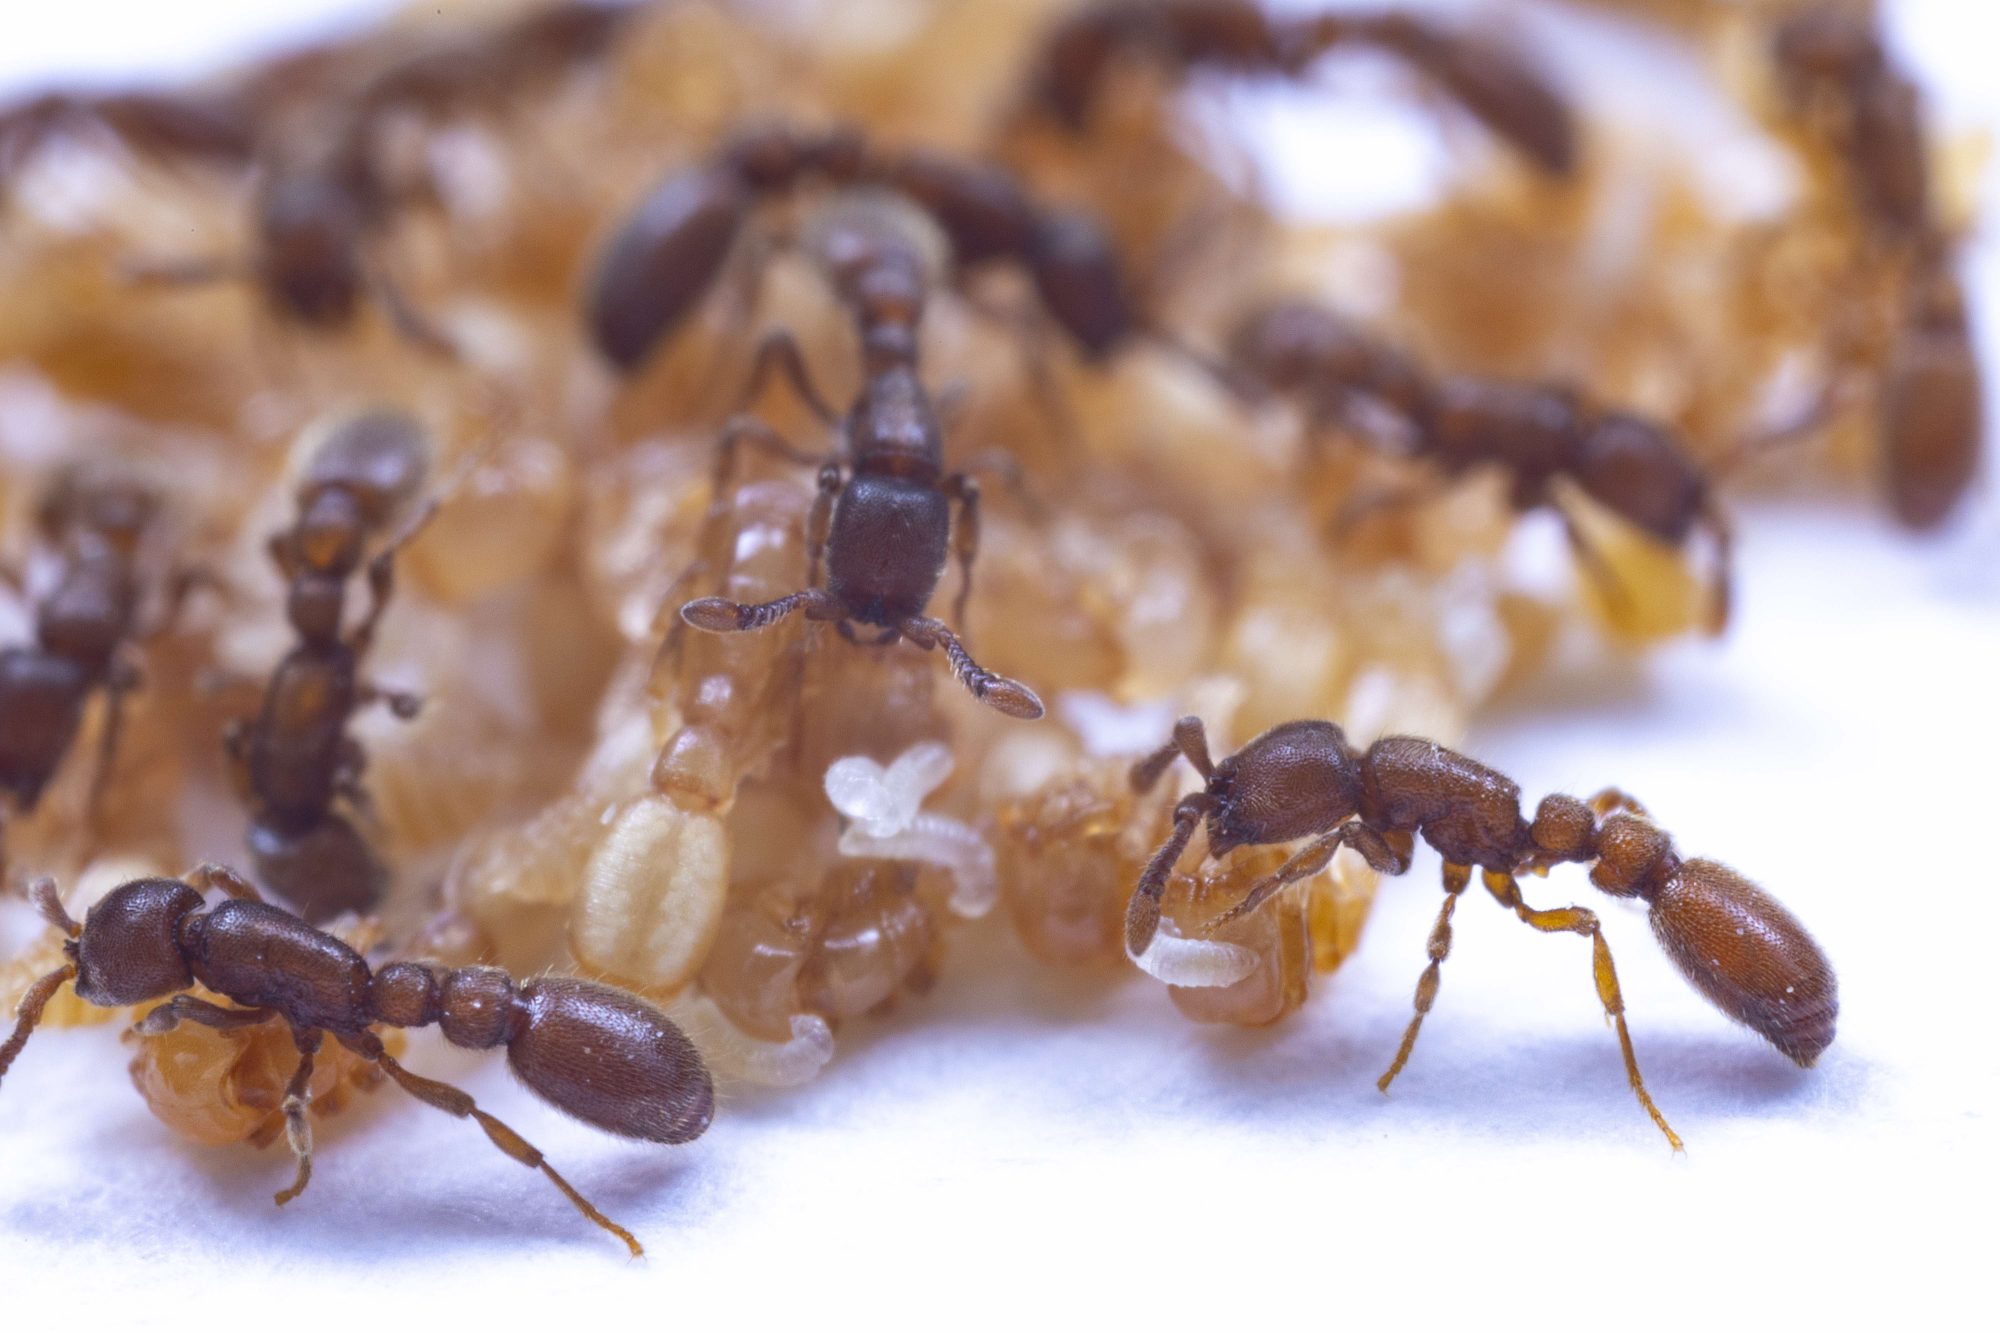 Clonal raider ants sipping ant milk from pupae.